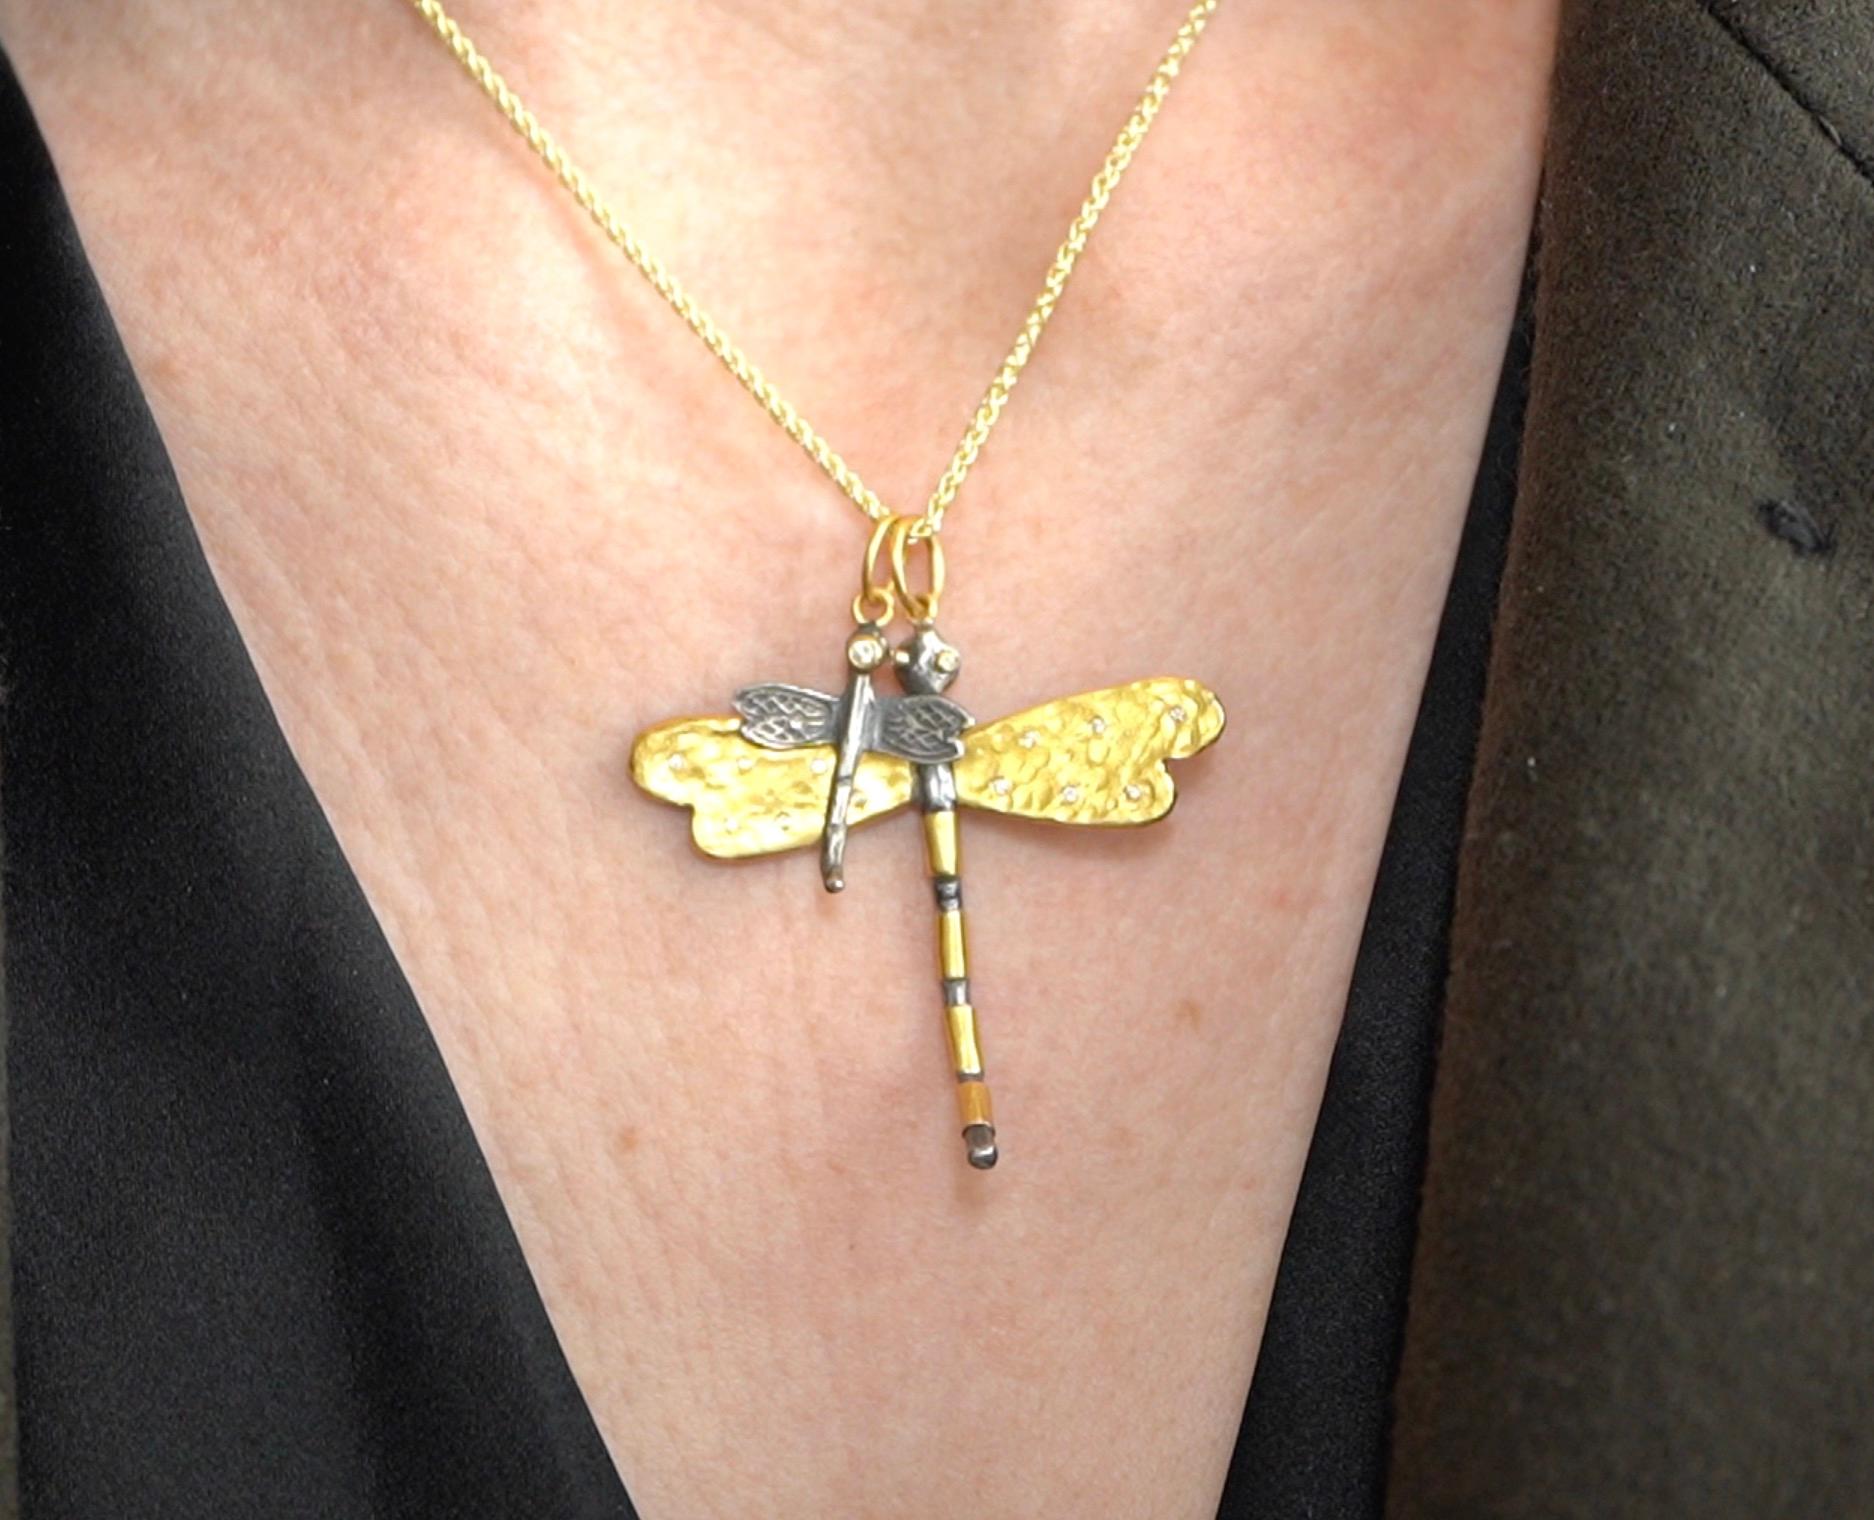 Large, Dragonfly Charm Pendant Necklace with Diamonds, 24kt Gold and Silver by Prehistoric Works of Istanbul, Turkey. Diamond - 0.07cts. This piece pairs well alone or with other coin amulets charms. Measures, large, 42mm x 41mm, comes with 18